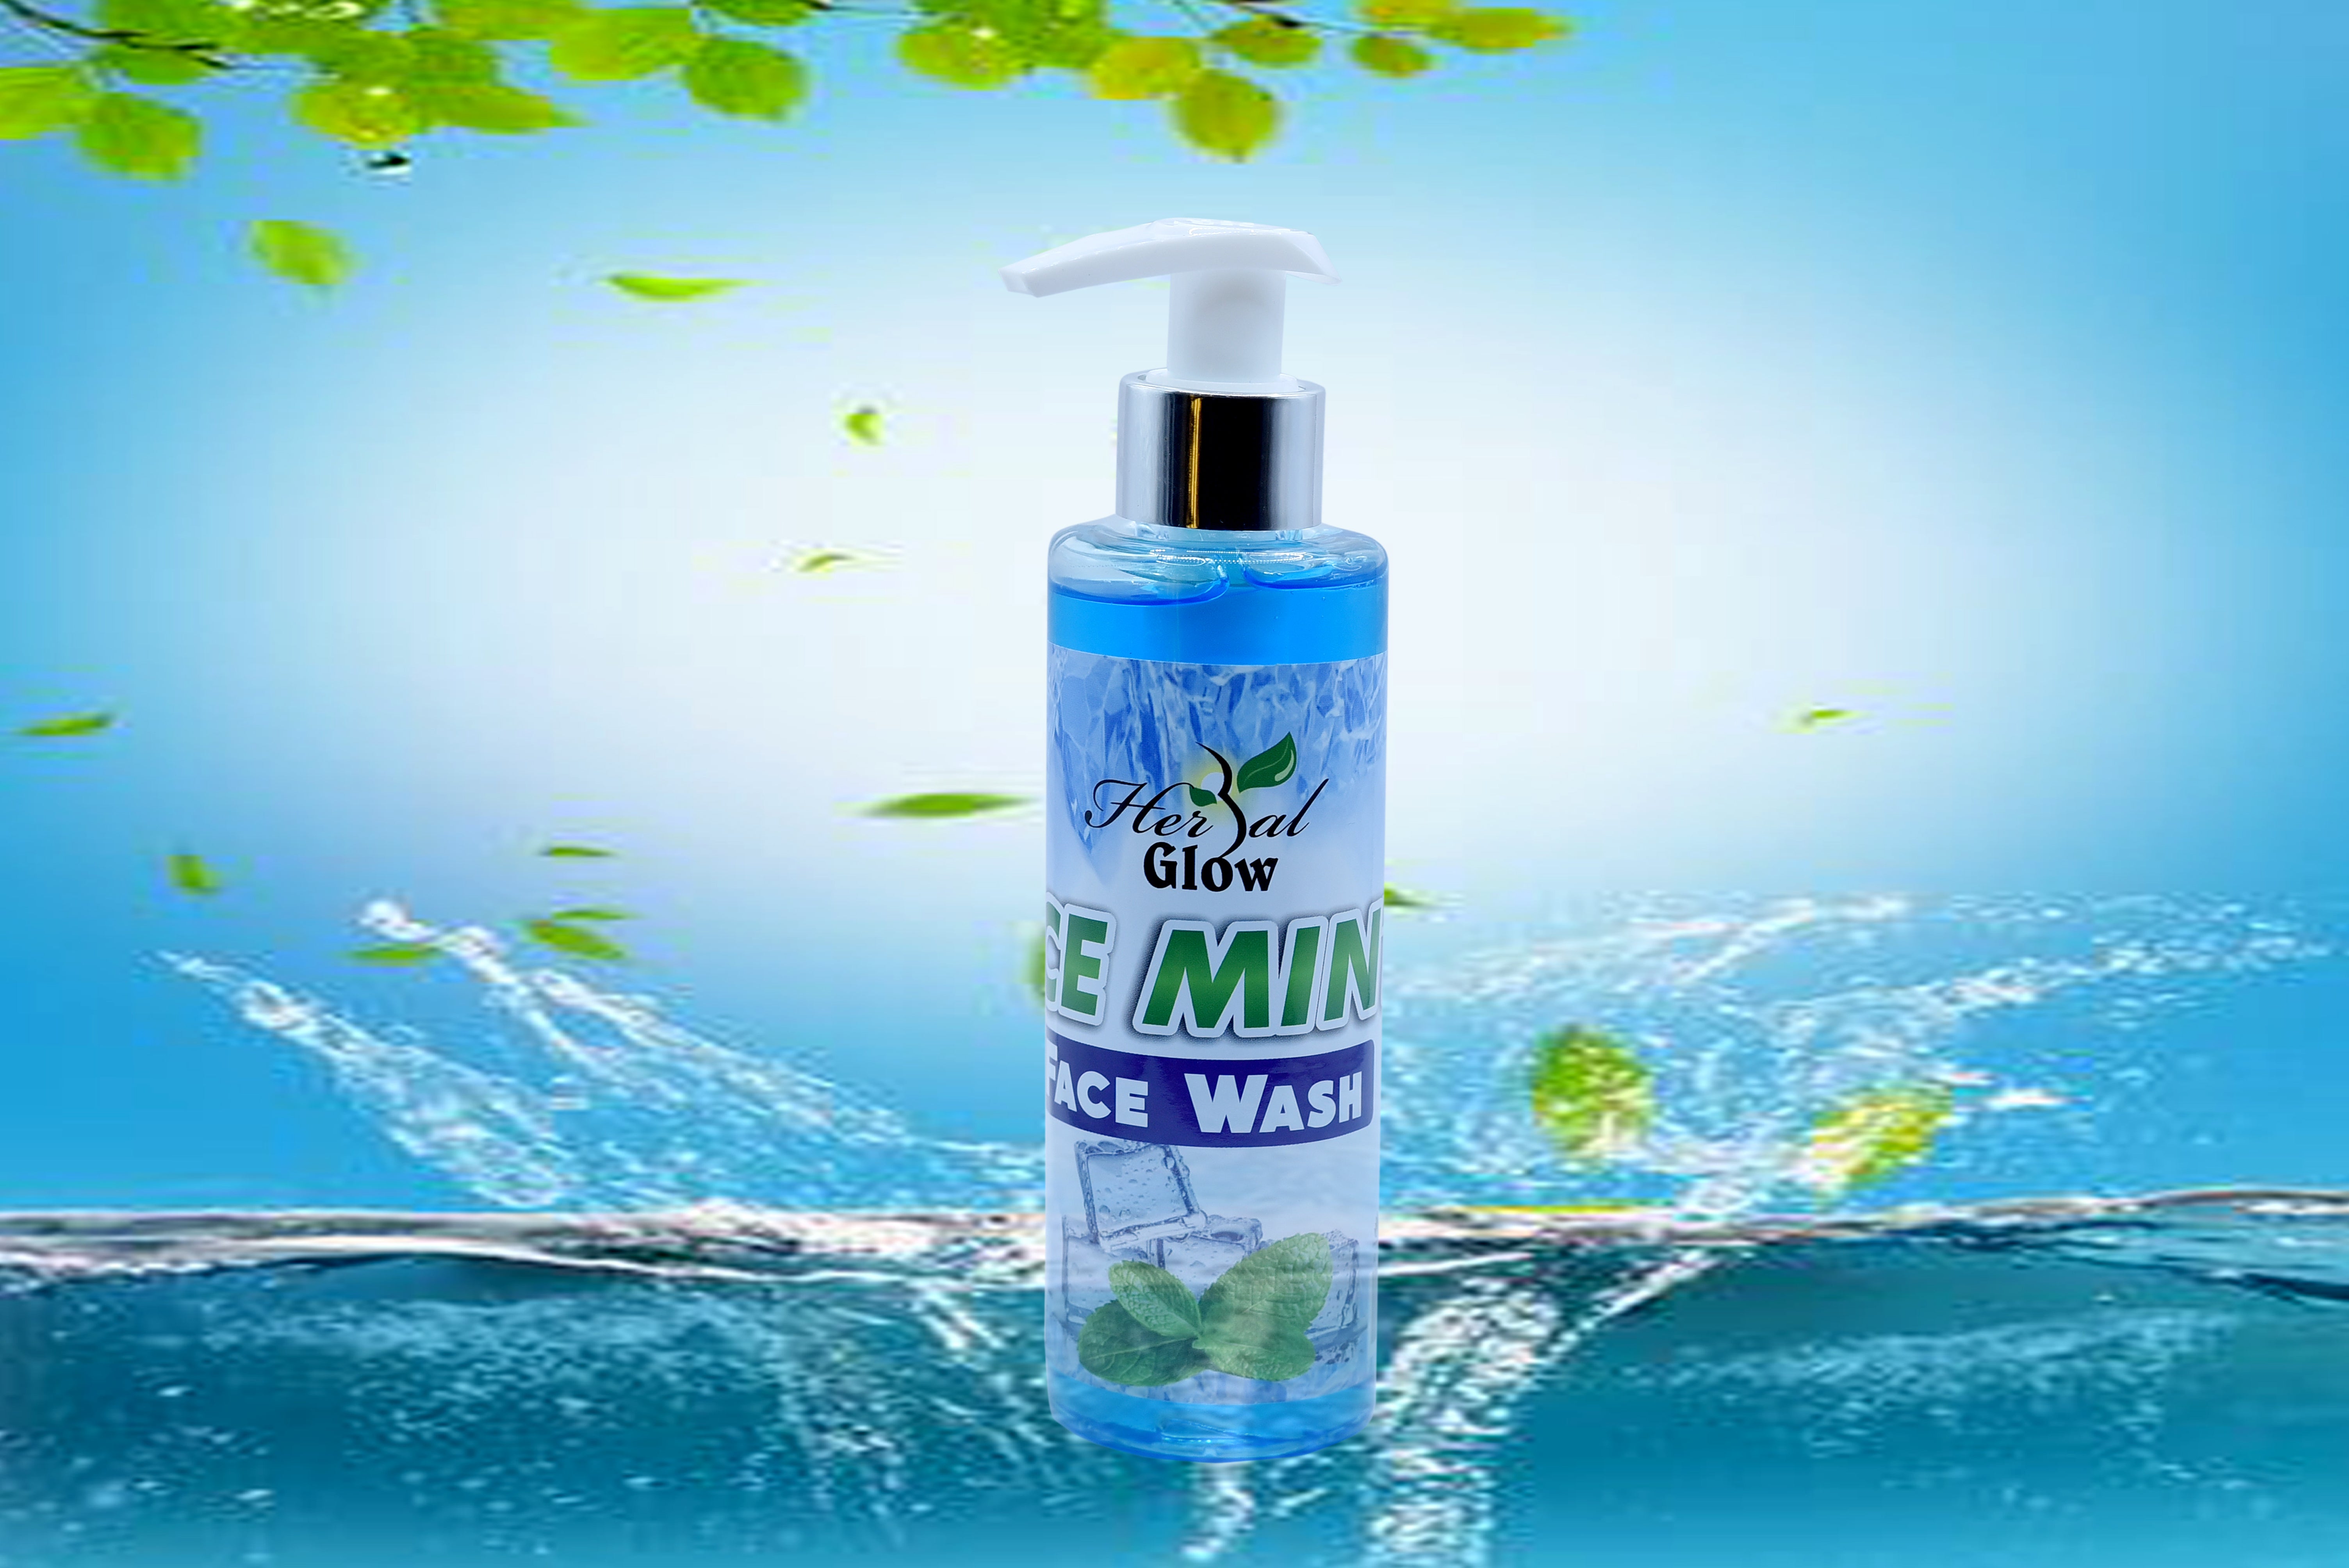 Ice Mint Face Wash - Refreshing Cleanser for Clear, Smooth Skin by Herbal Glow